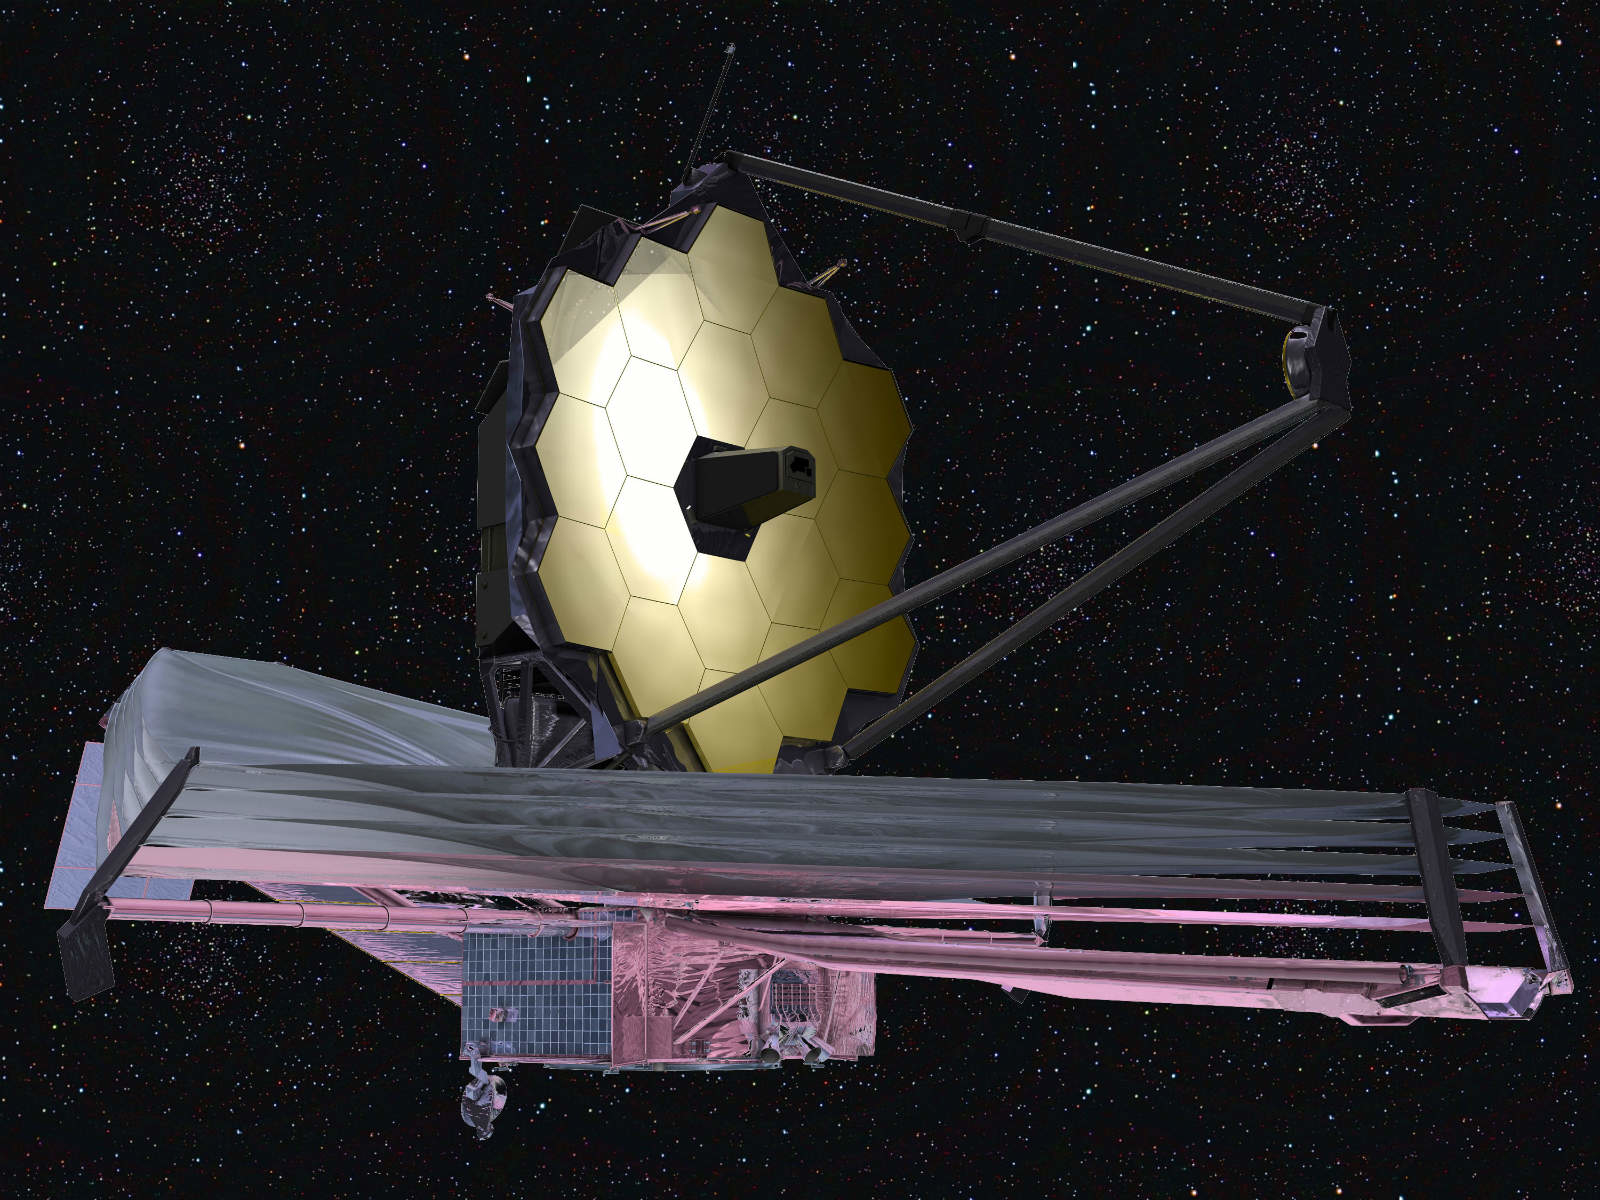 The launch of the space telescope 